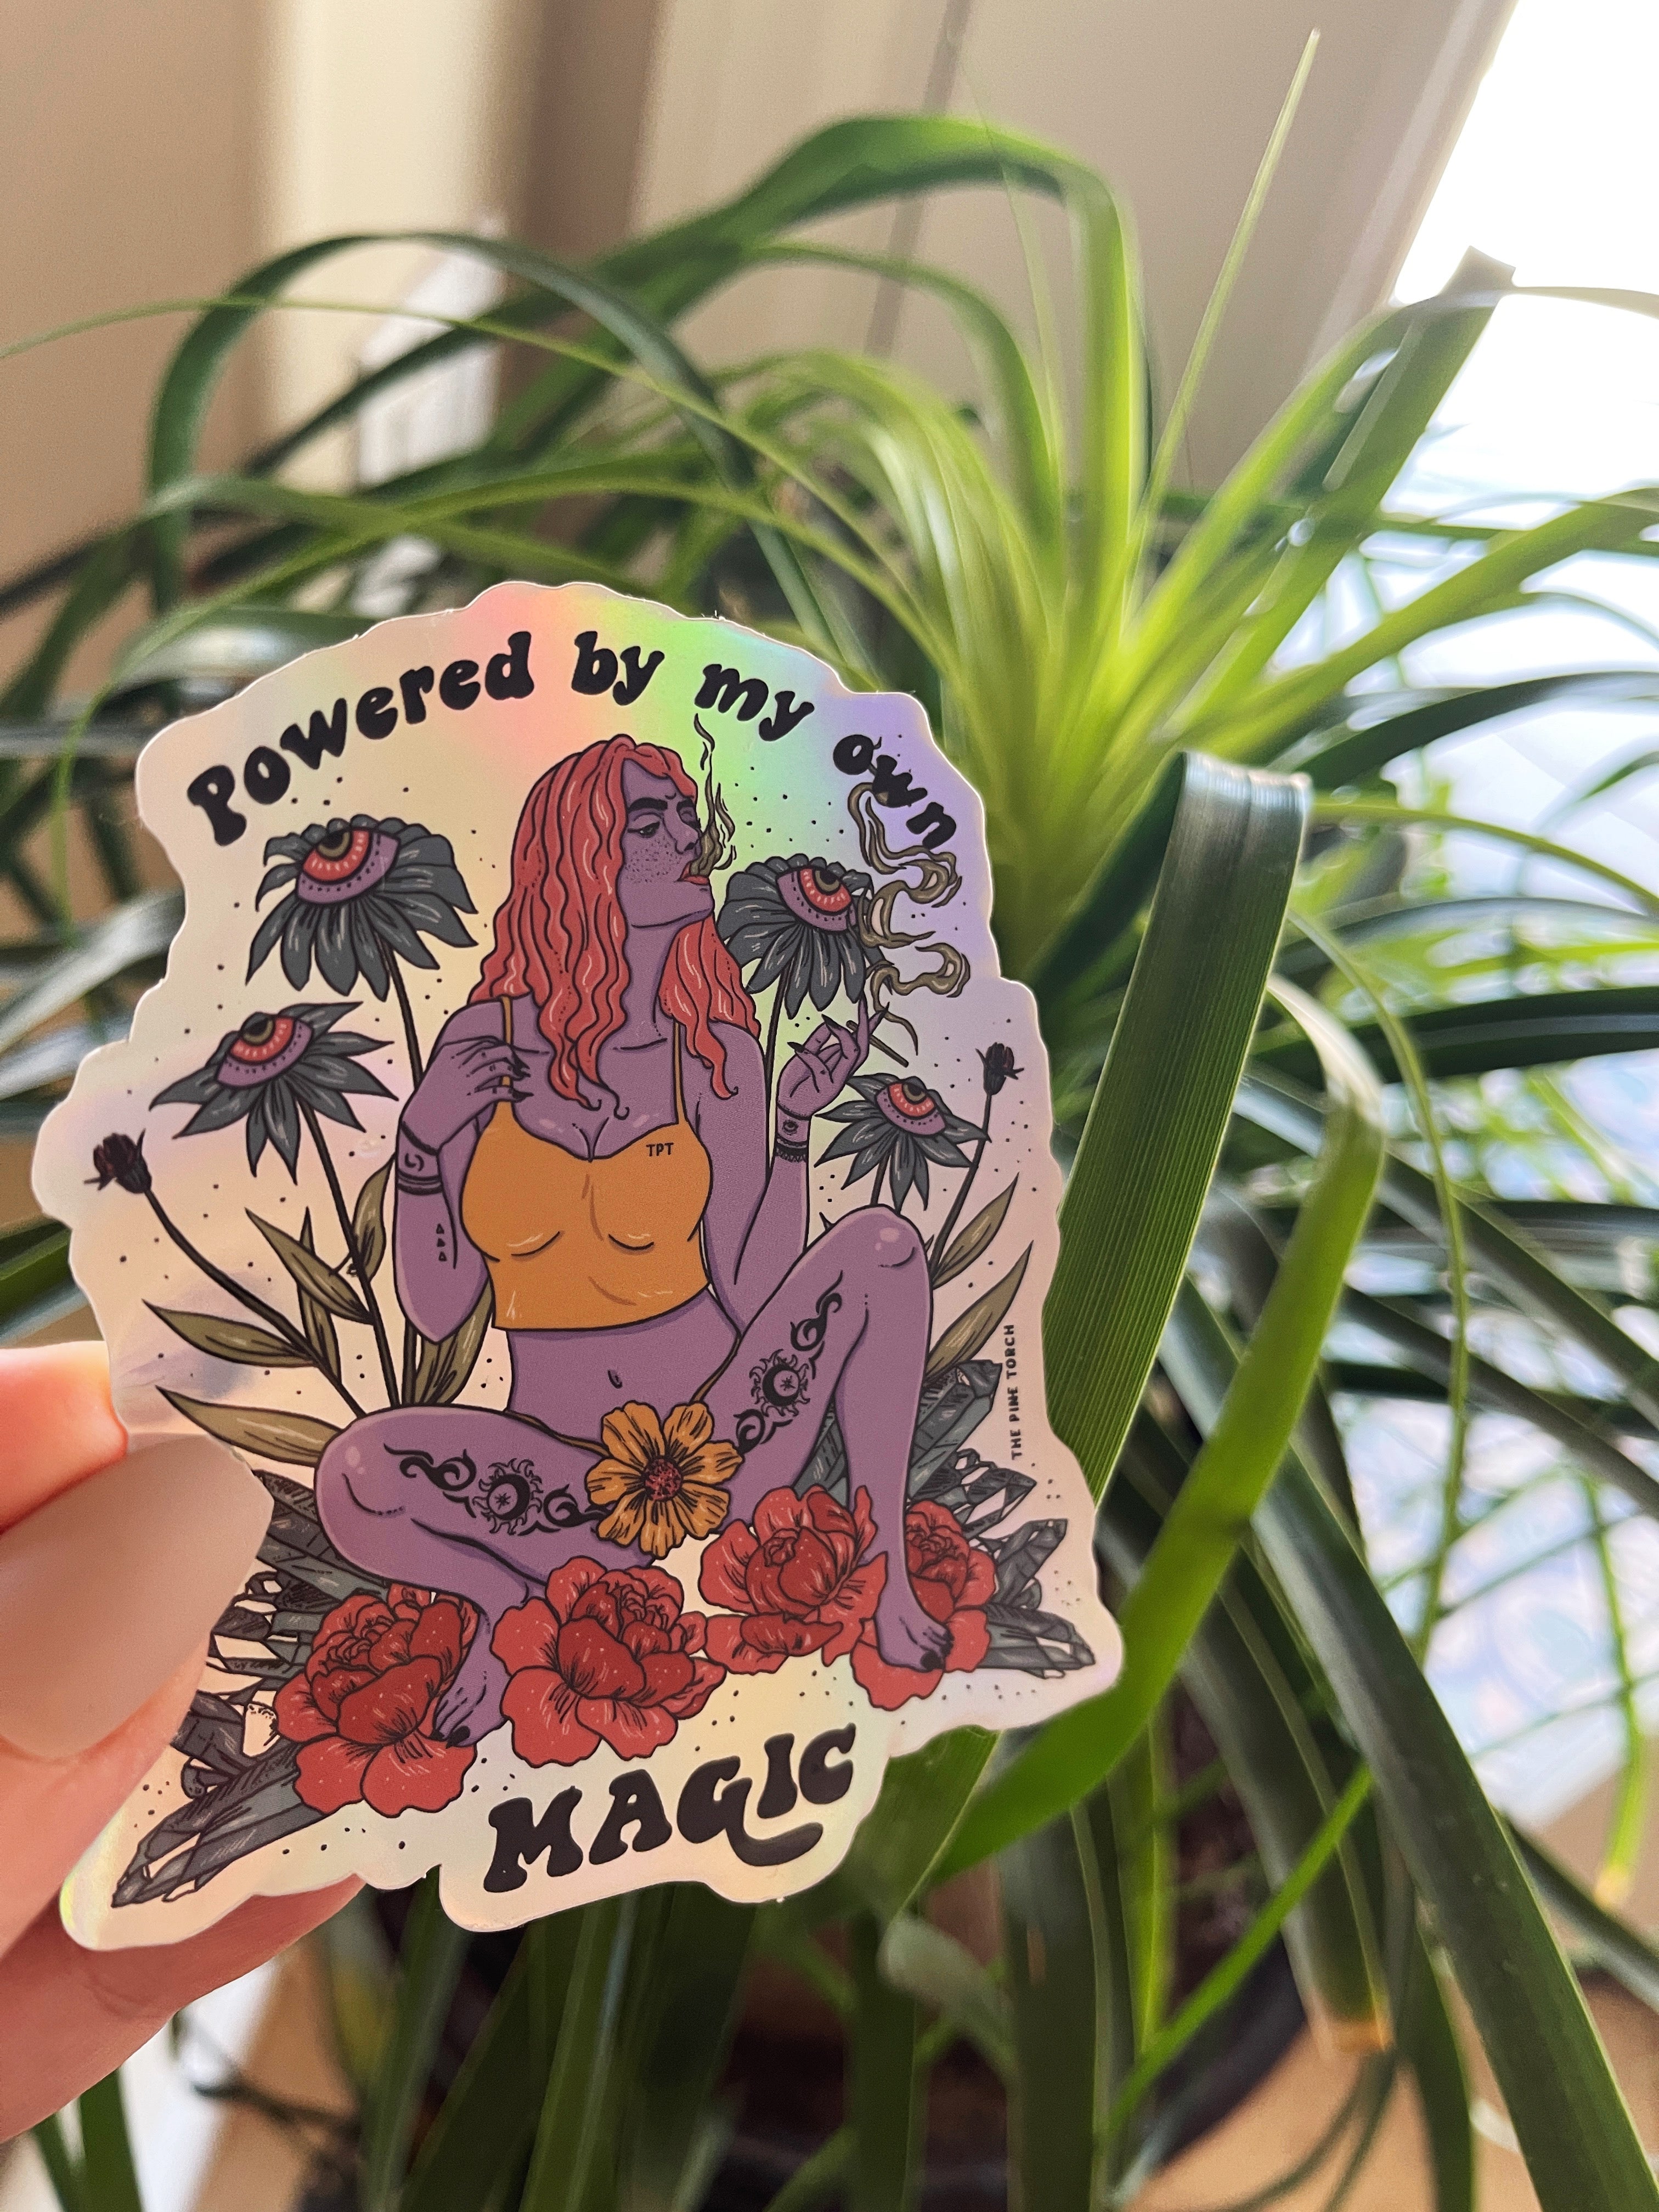 POWERED BY MY OWN MAGIC « HOLOGRAPHIC STICKER »